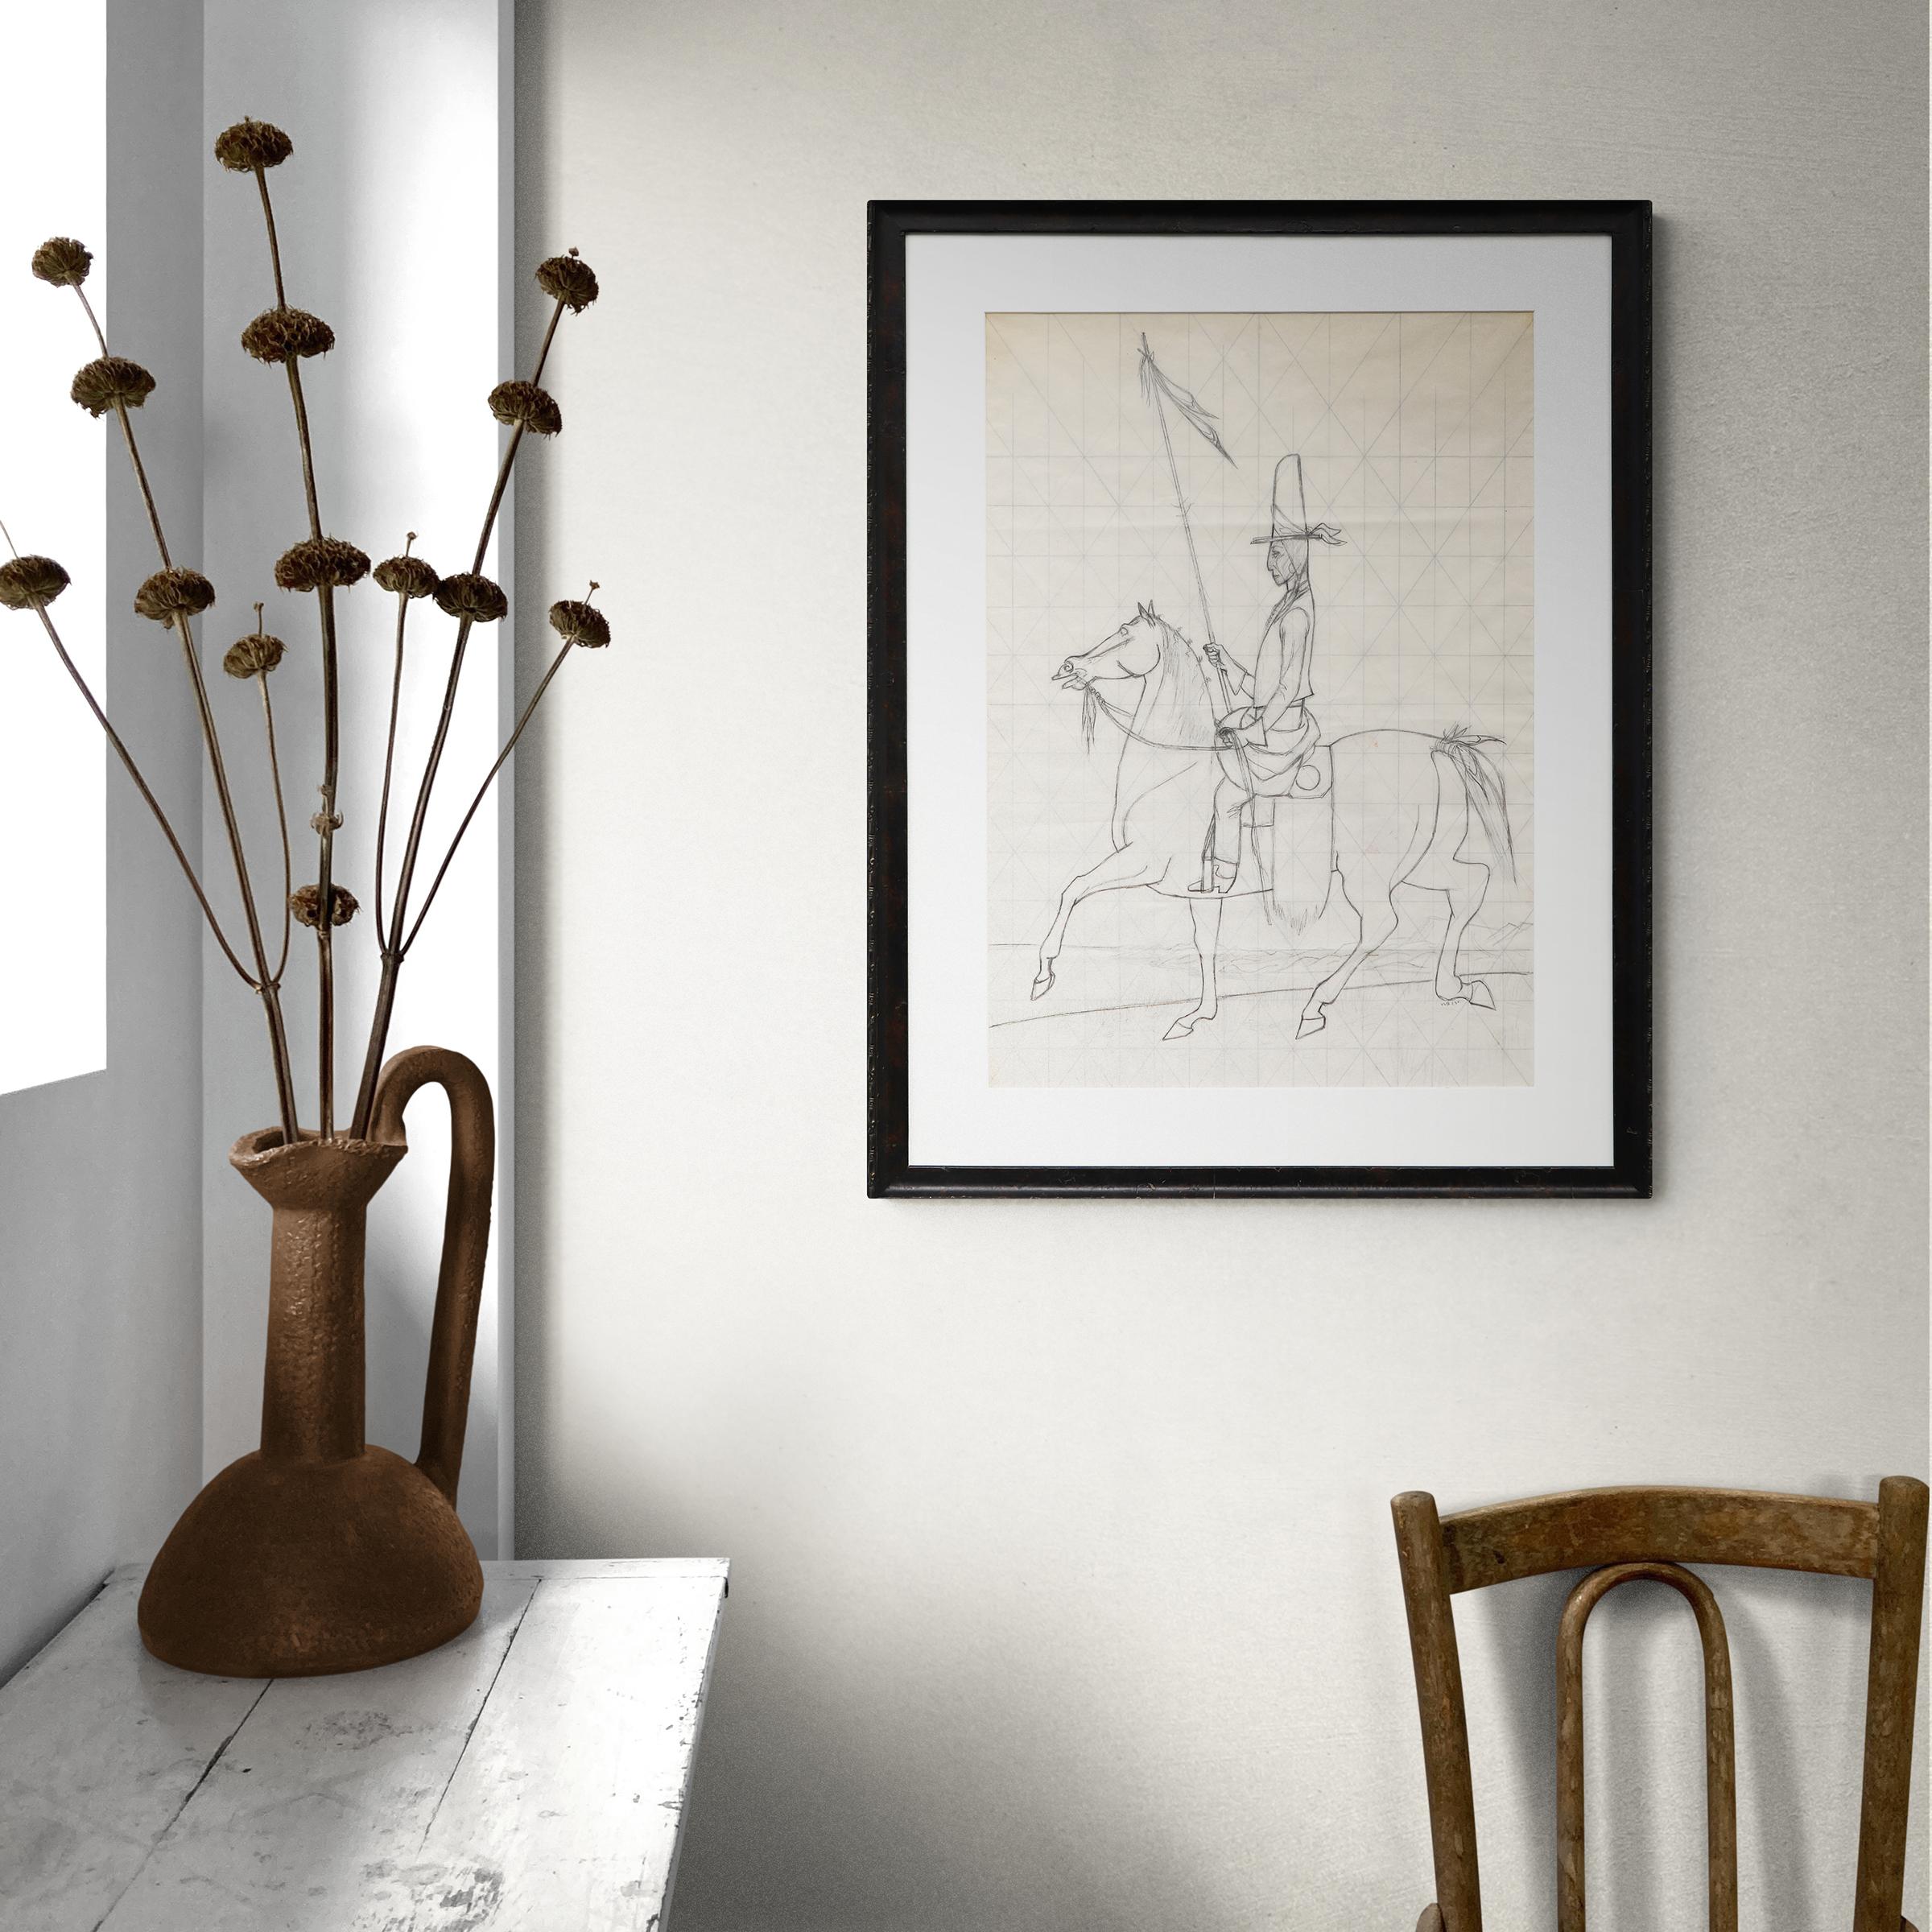 Untitled graphite on paper drawing by Verona Burkhard (1910-2004) of a figure on horseback. Preliminary sketch for a later completed mural. Presented in a custom frame with all archival materials, outer dimensions measure 29 ¾ x 22 ¾ inches.  Image